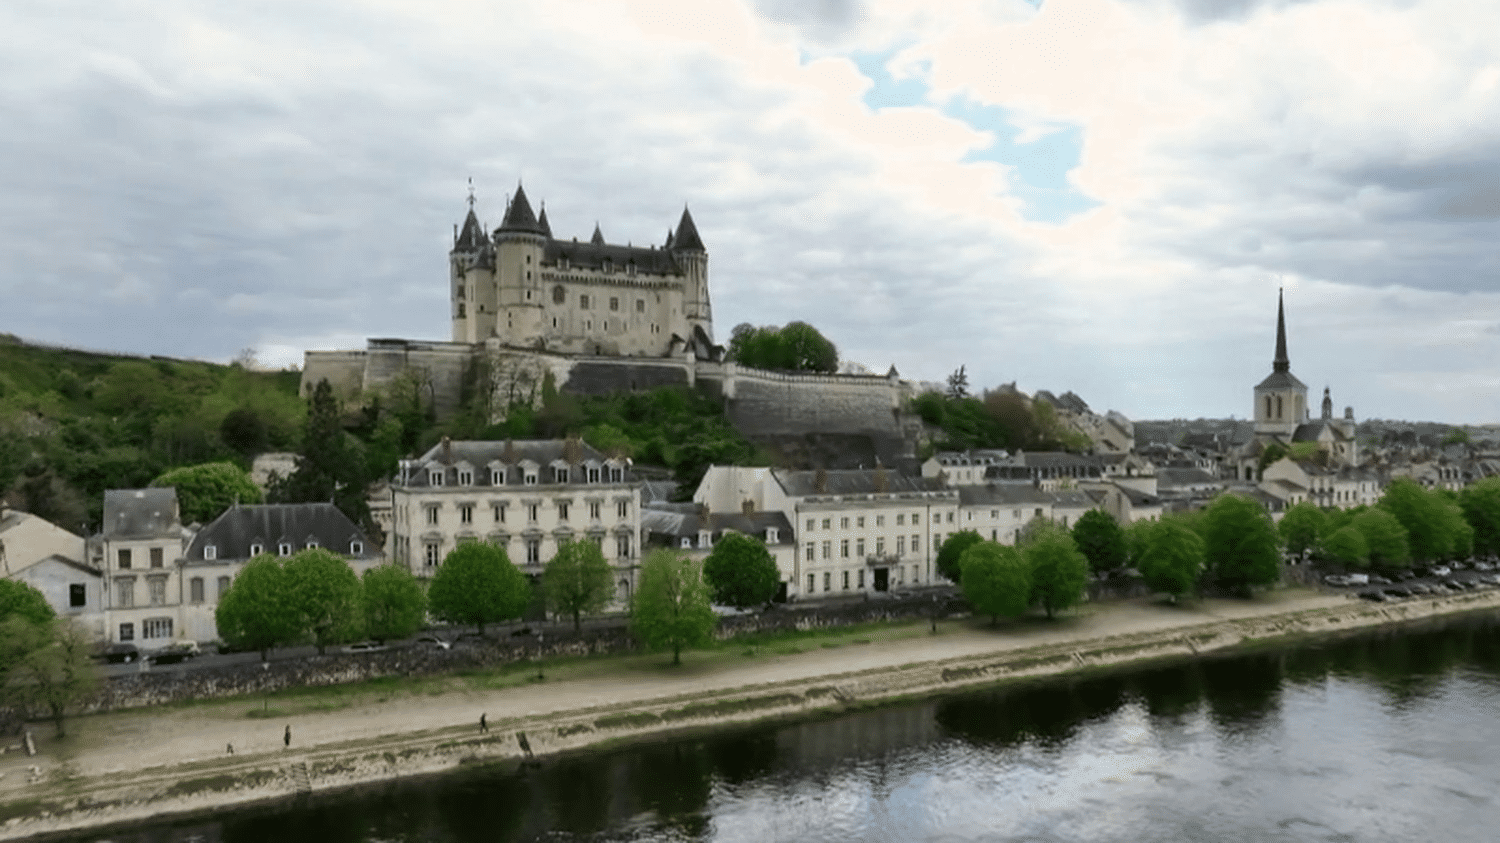 Heritage: Saumur Castle, a medieval palace on the banks of the Loire